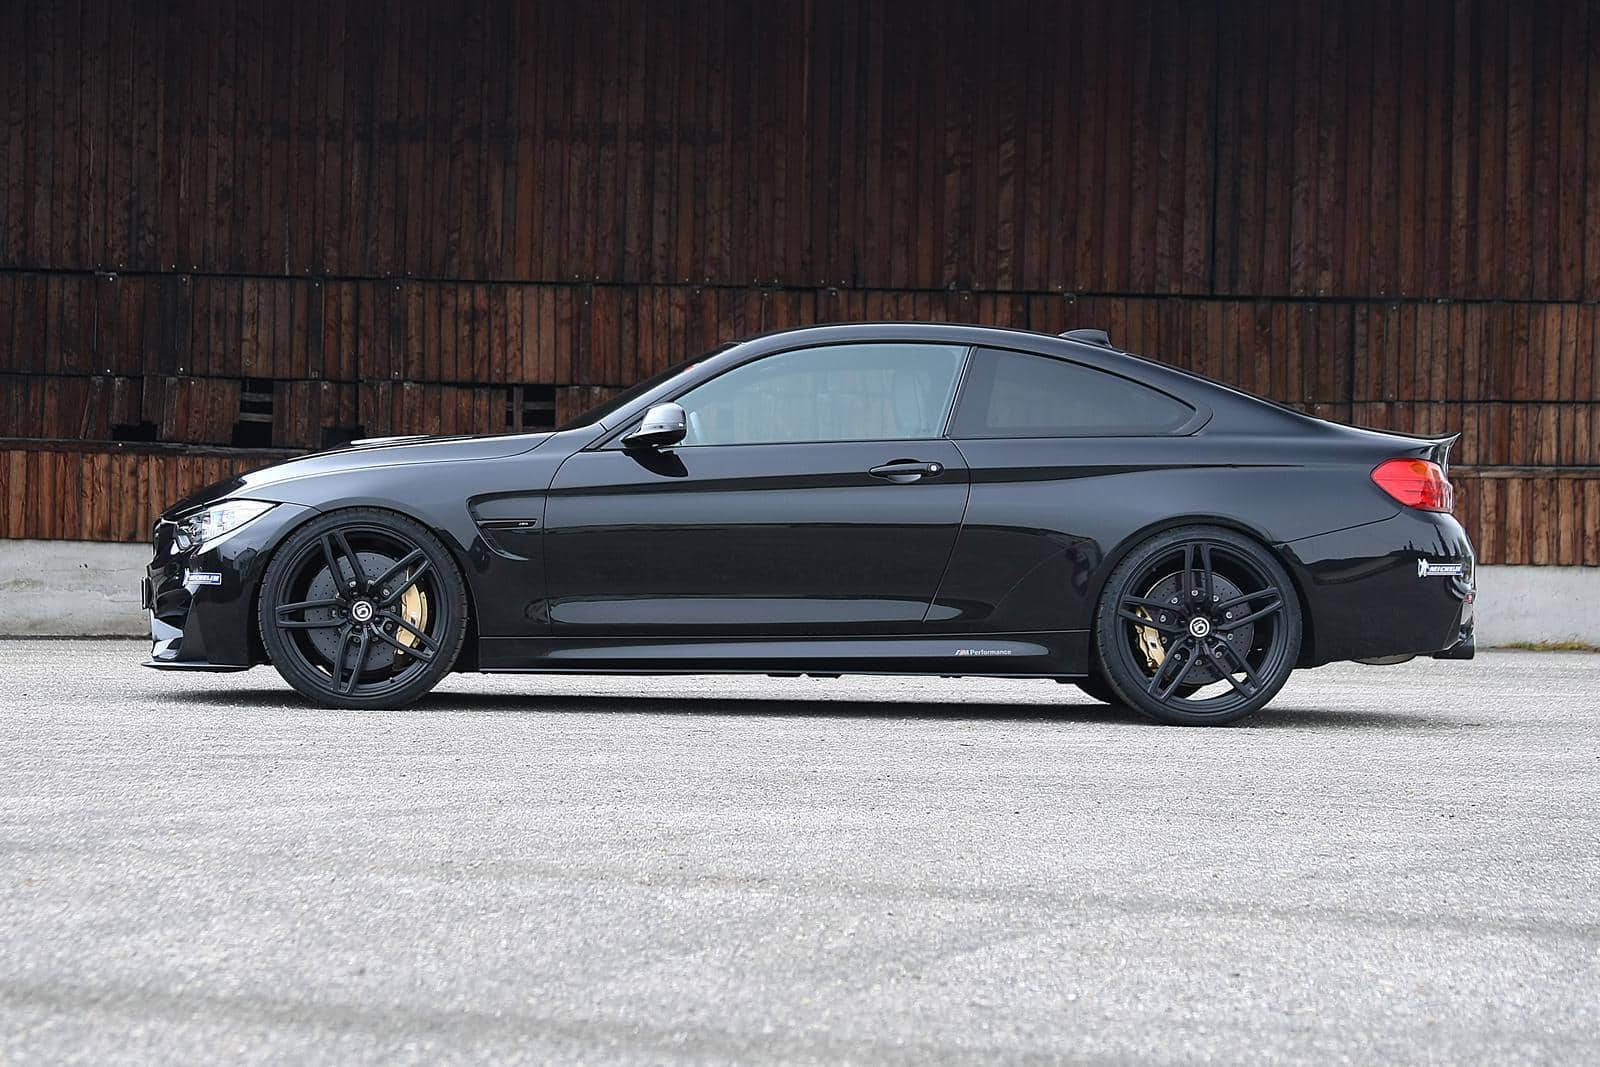 BMW-M4-Coupe-by-G-Power 7